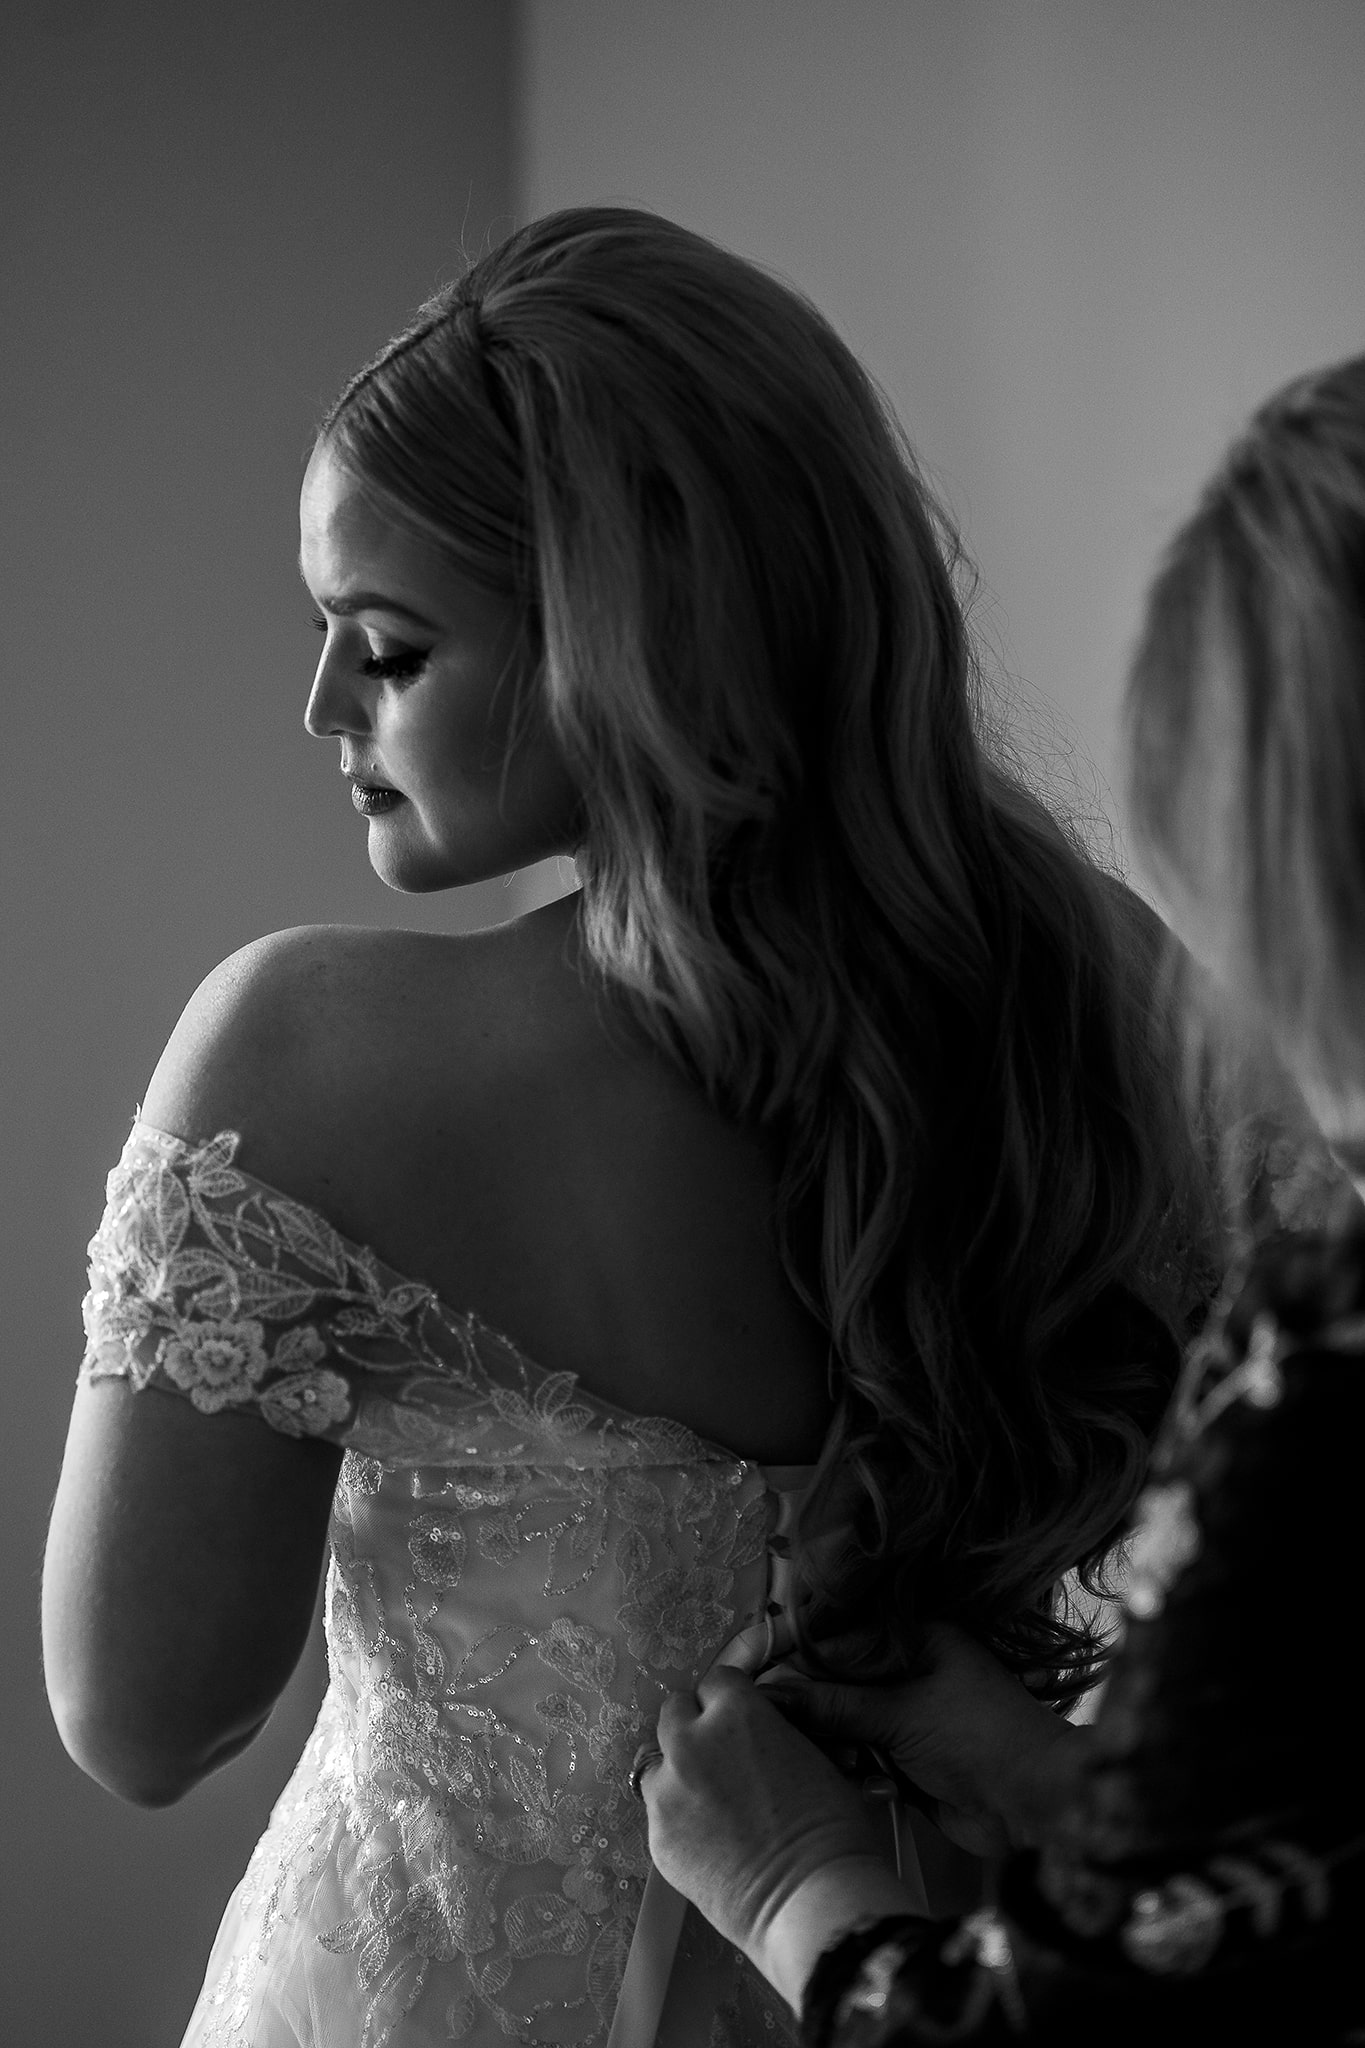 Black and white photo of elegant bride with long hair having her wedding dress fastened at the back, while looking over her shoulder